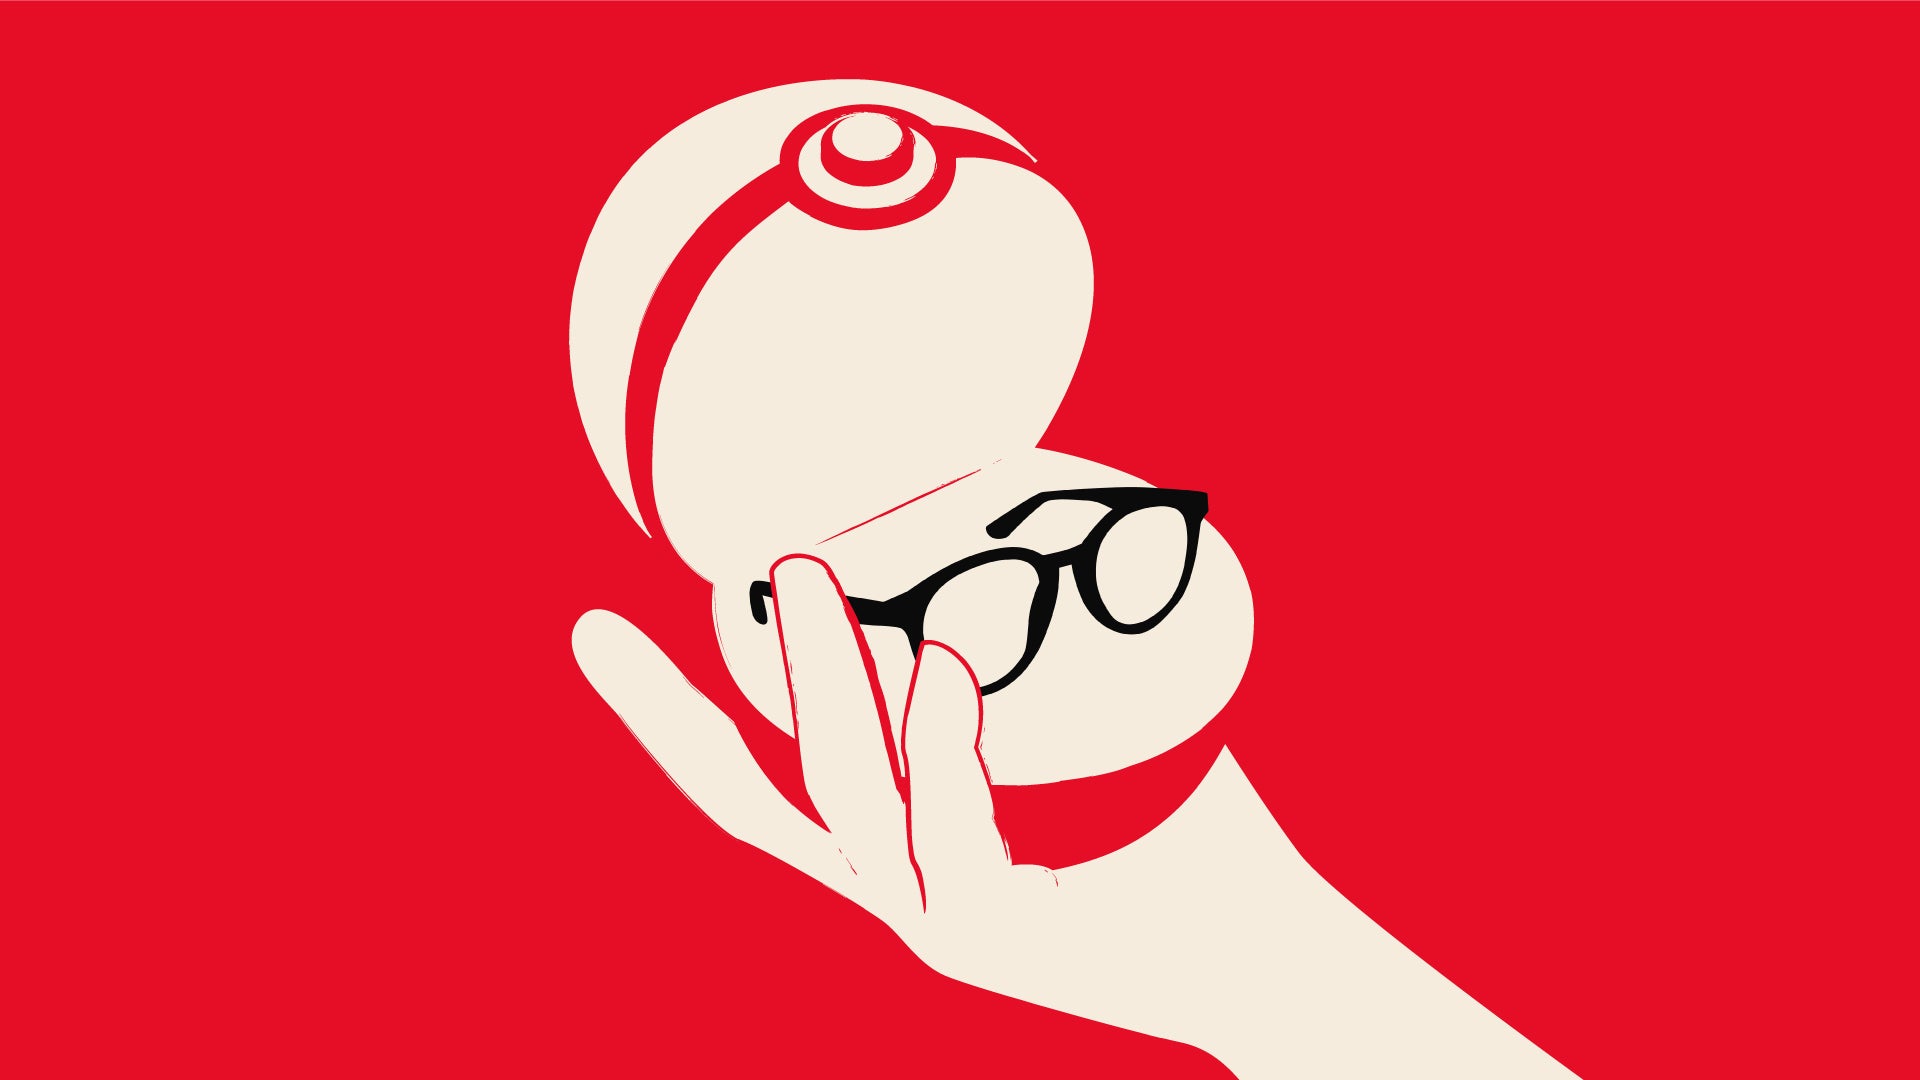 An illustration showing a hand holding an open pokeball, and inside is a pair of black-rimmed spectacles. Most of the image is red, with only some negative-image-white for the hand and details of the pokeball.